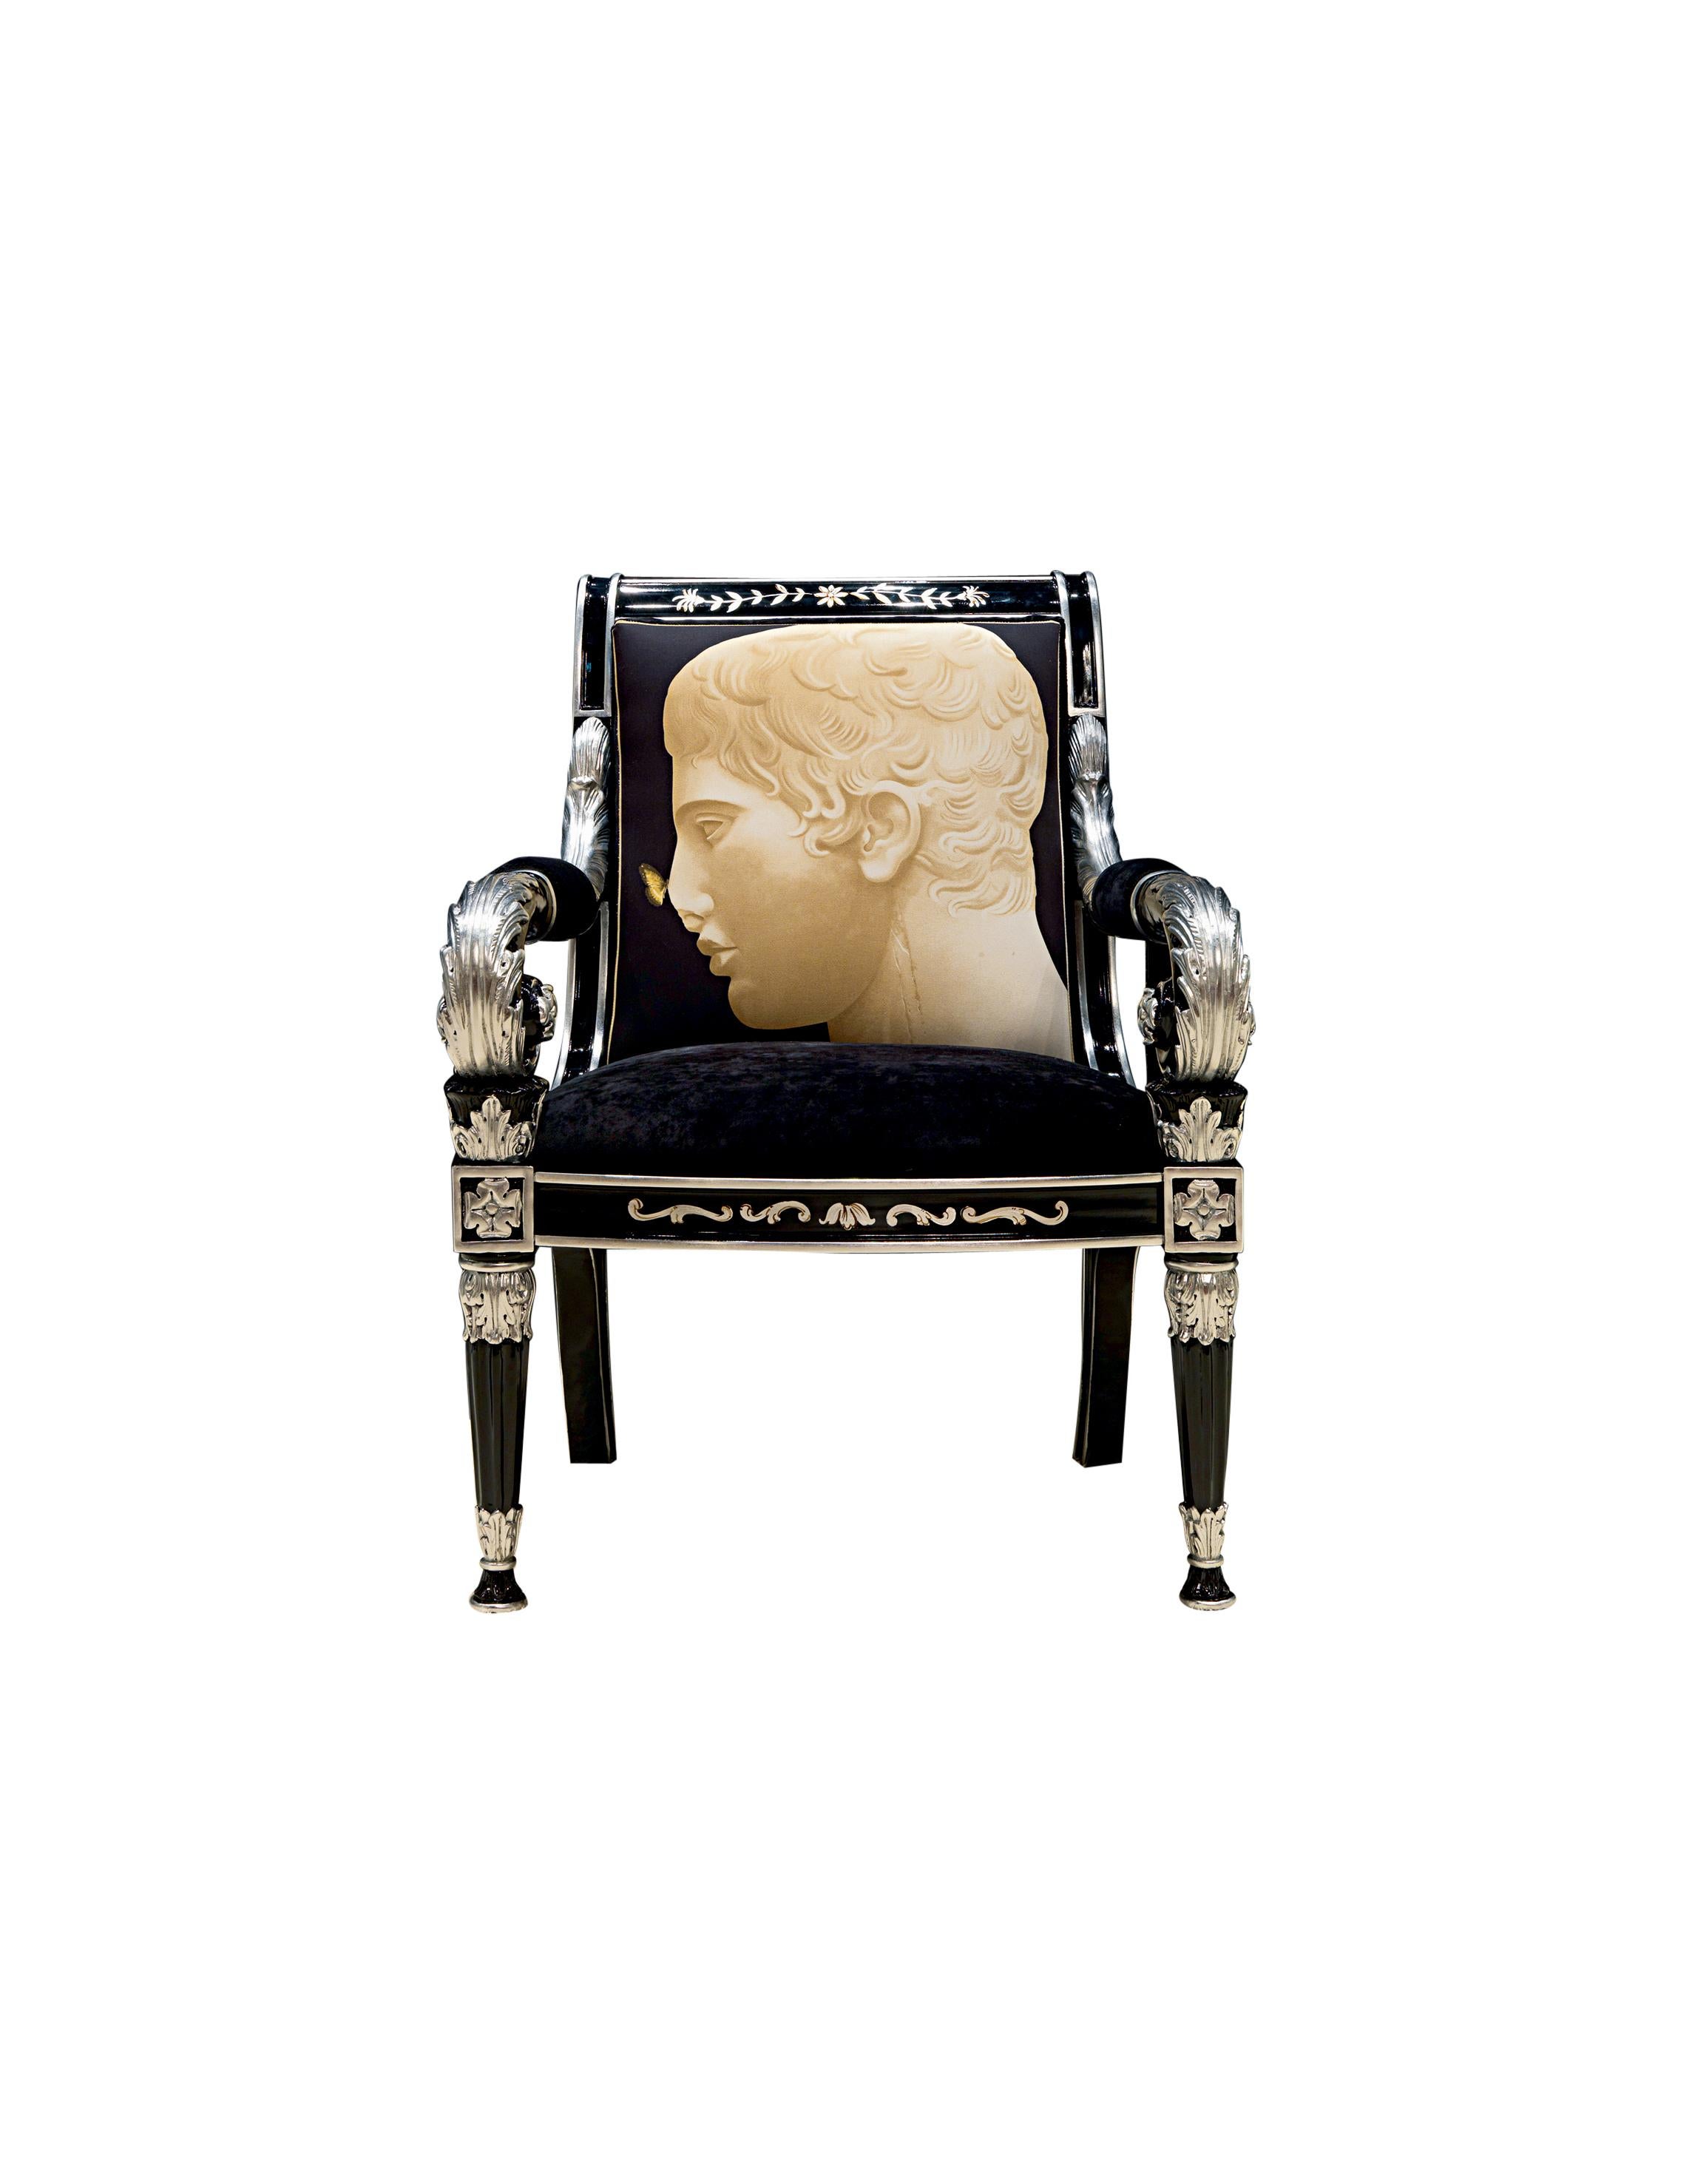 The Faraone-Canc armchair features the fabric with an image from the “DORIFORO” collection, by Paolo Canciani for Zanaboni. It is a tribute to classic and neoclassic style read in a contemporary key, perfect for any high end luxury interior where it